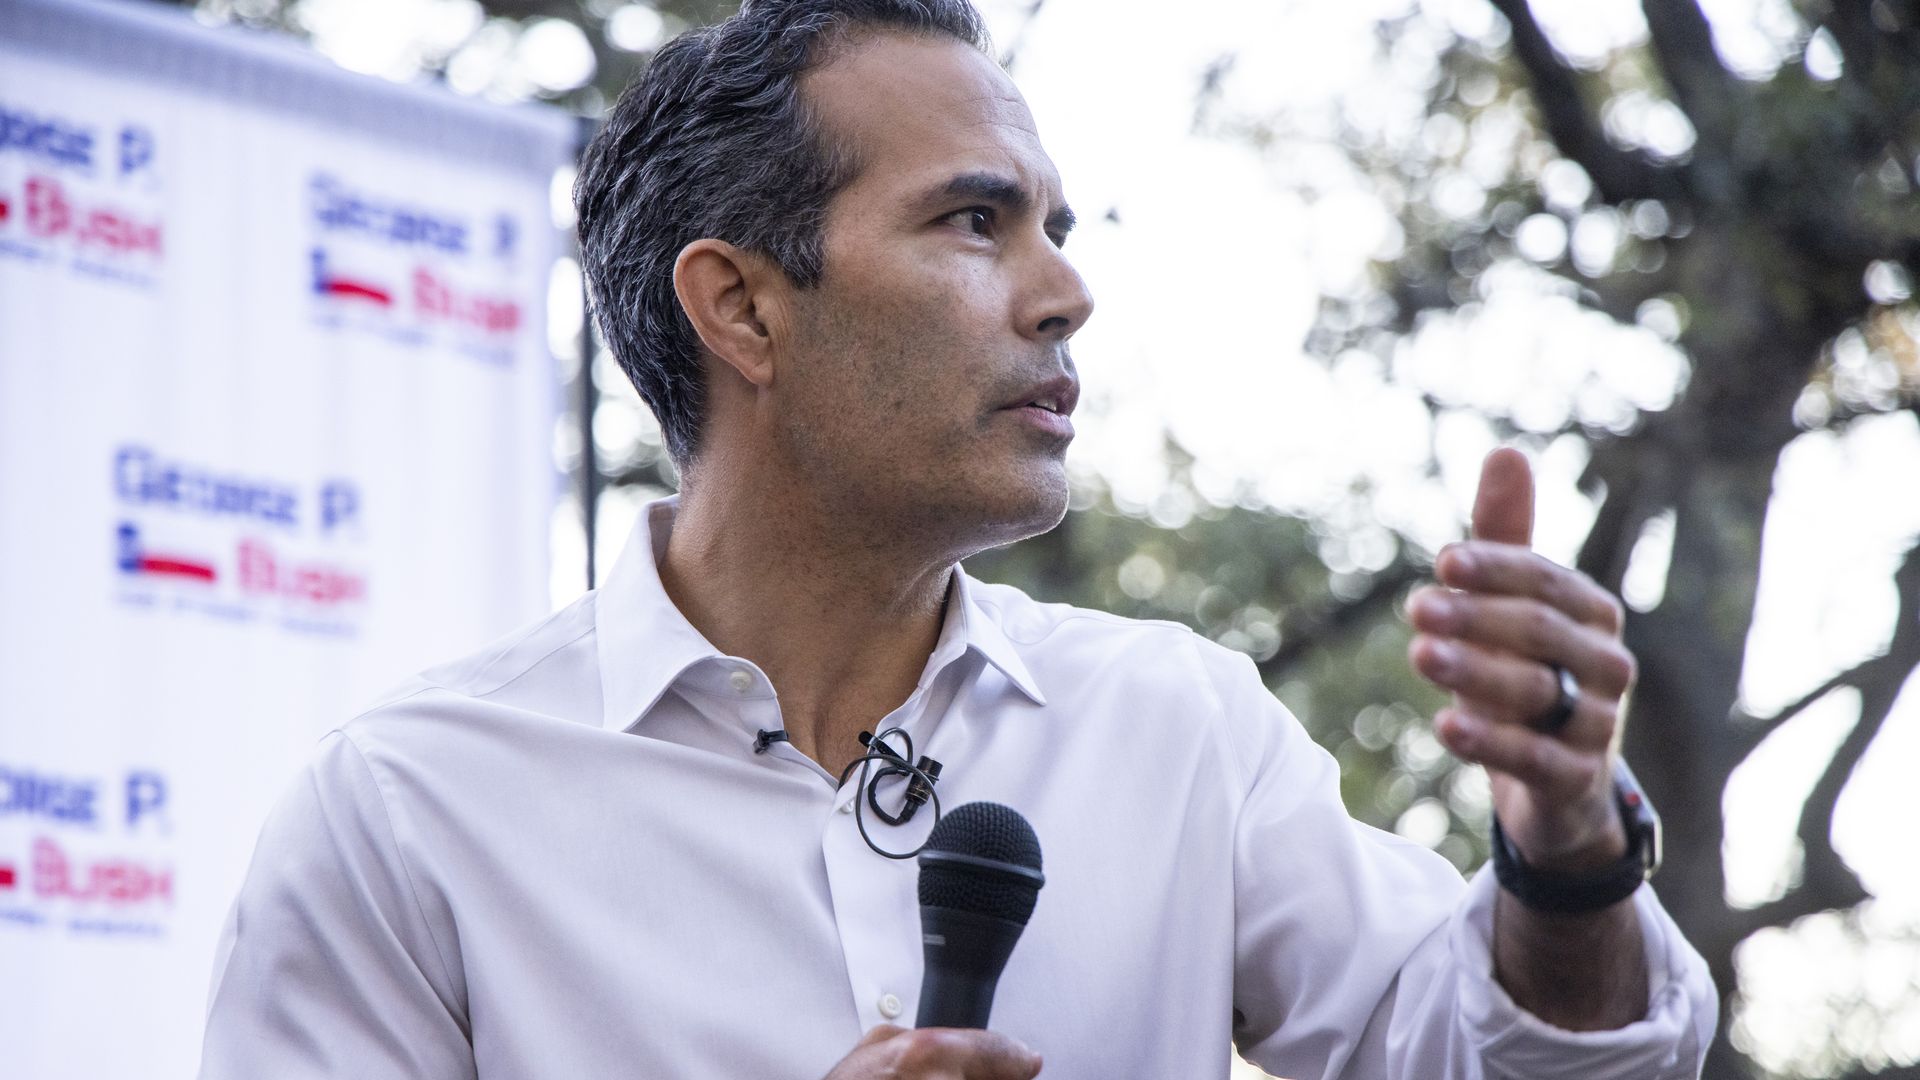 George P. Bush speaks at an outdoor campagin event while holding a black microphone in one hand and gesturing with the other